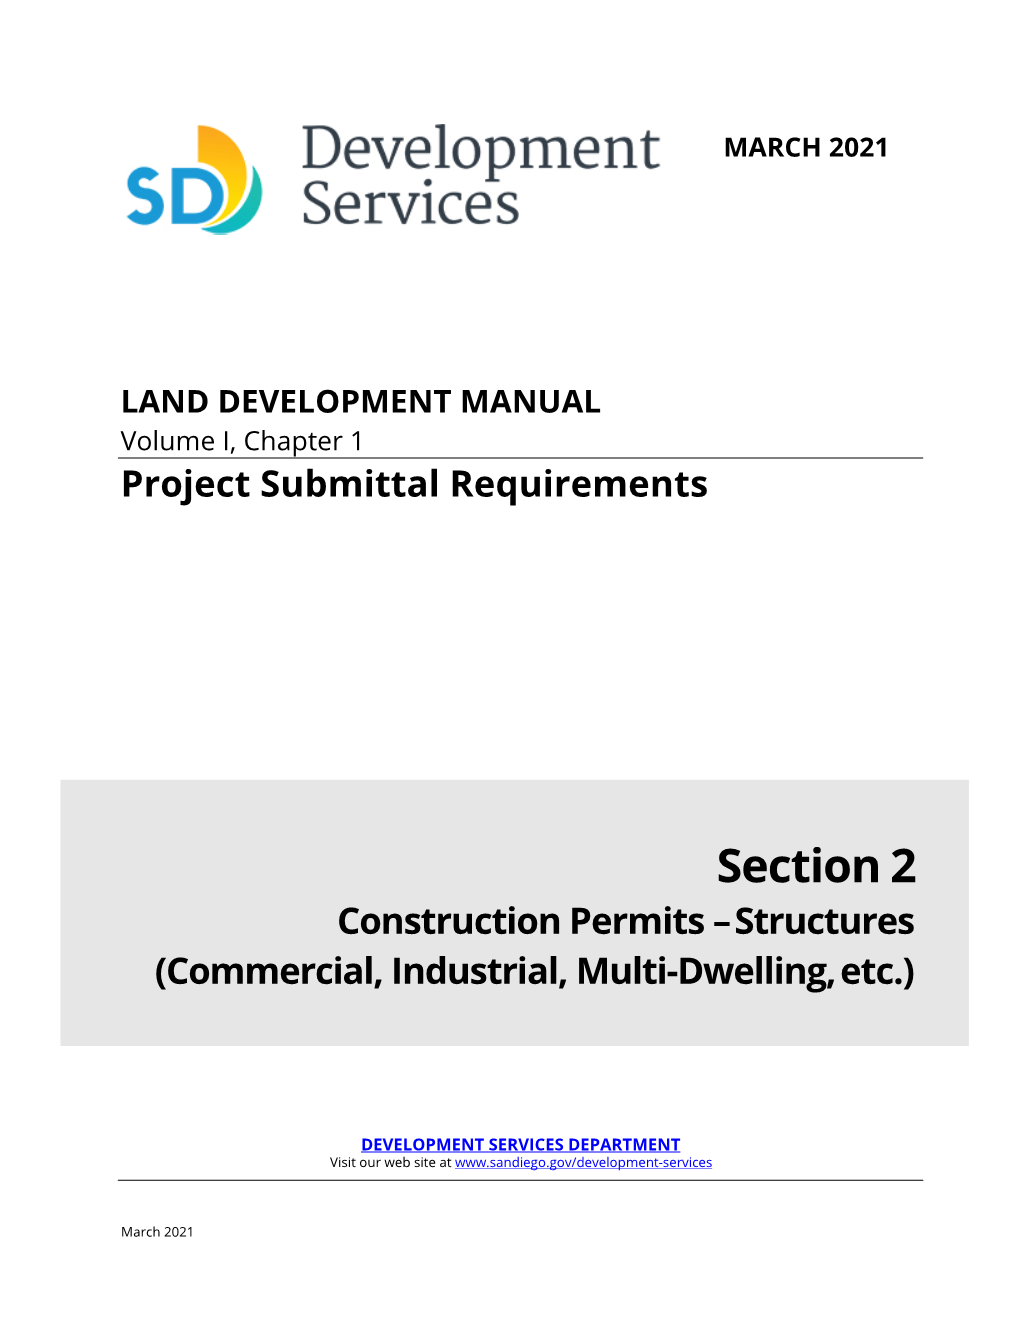 Project Submittal Manual, Section 2, Construction Permits—Structures